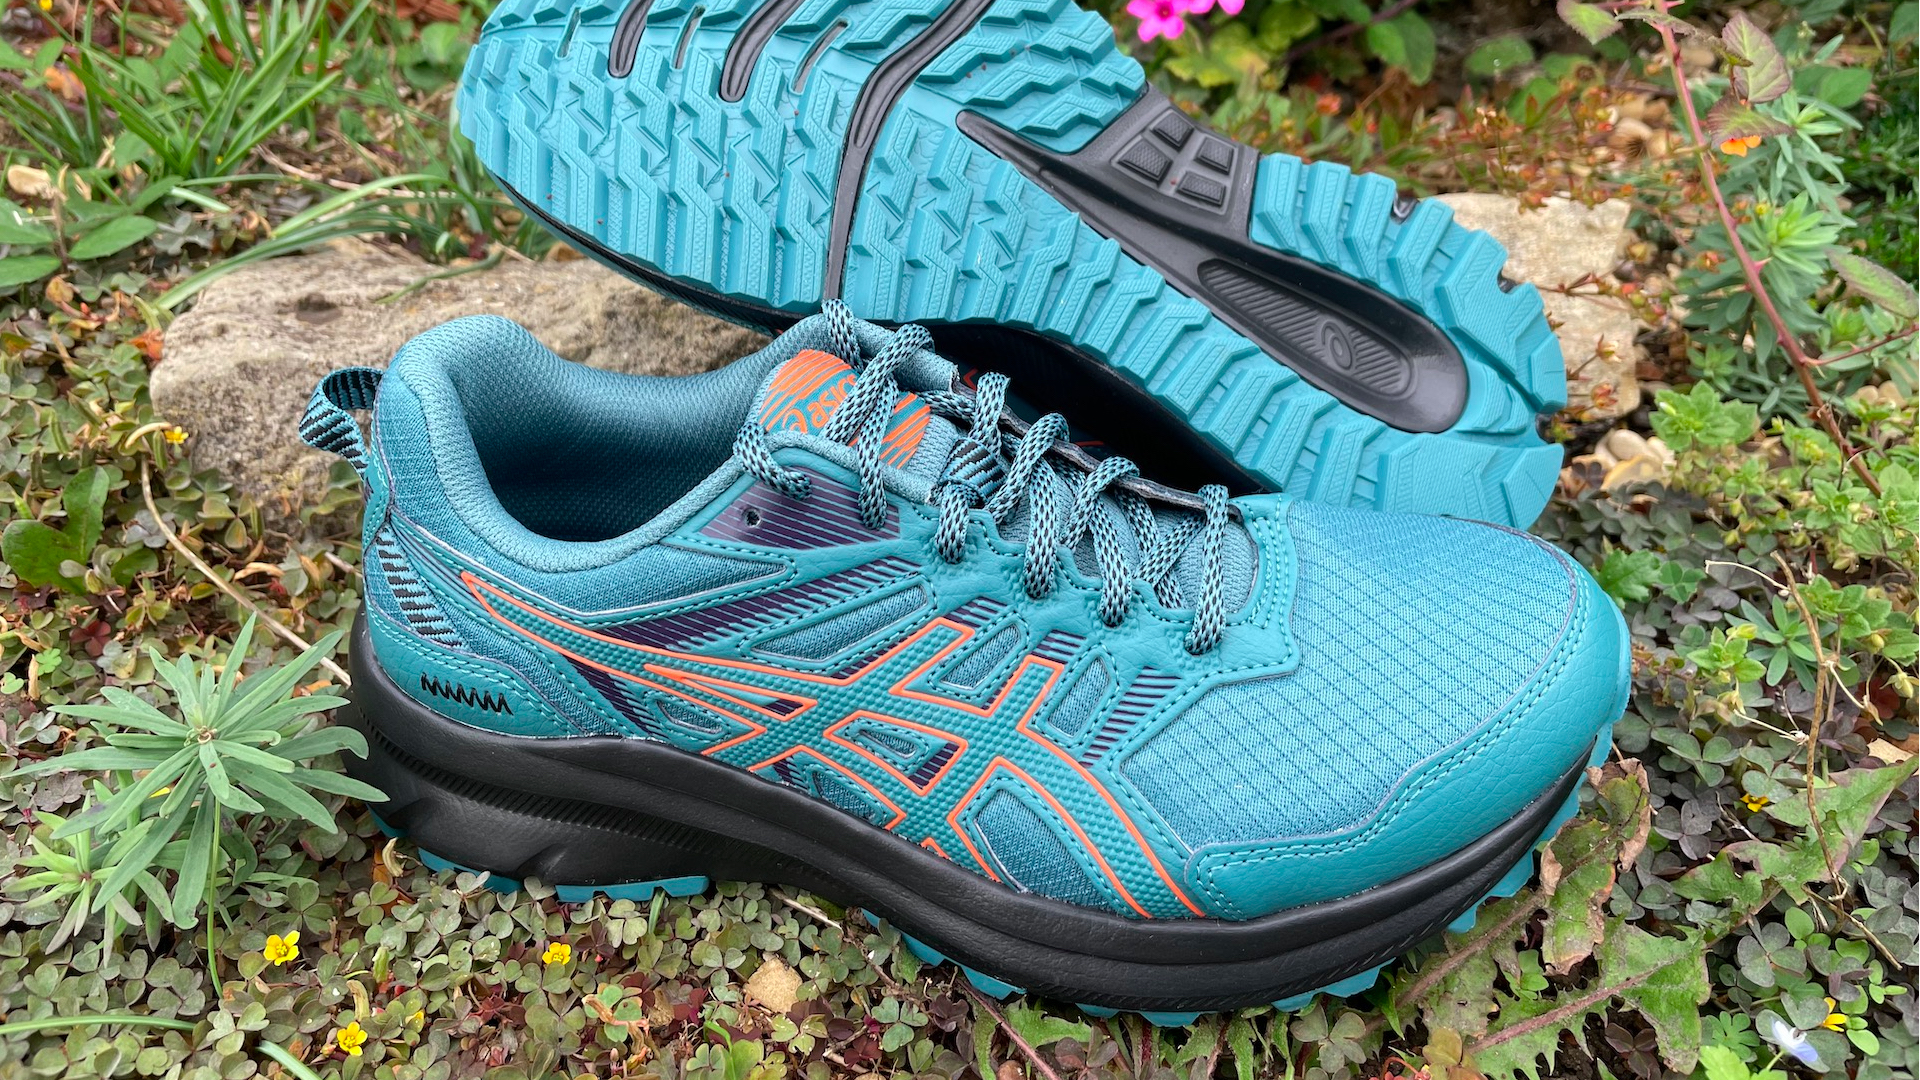 Asics Trail Scout 2 running shoe review | Advnture